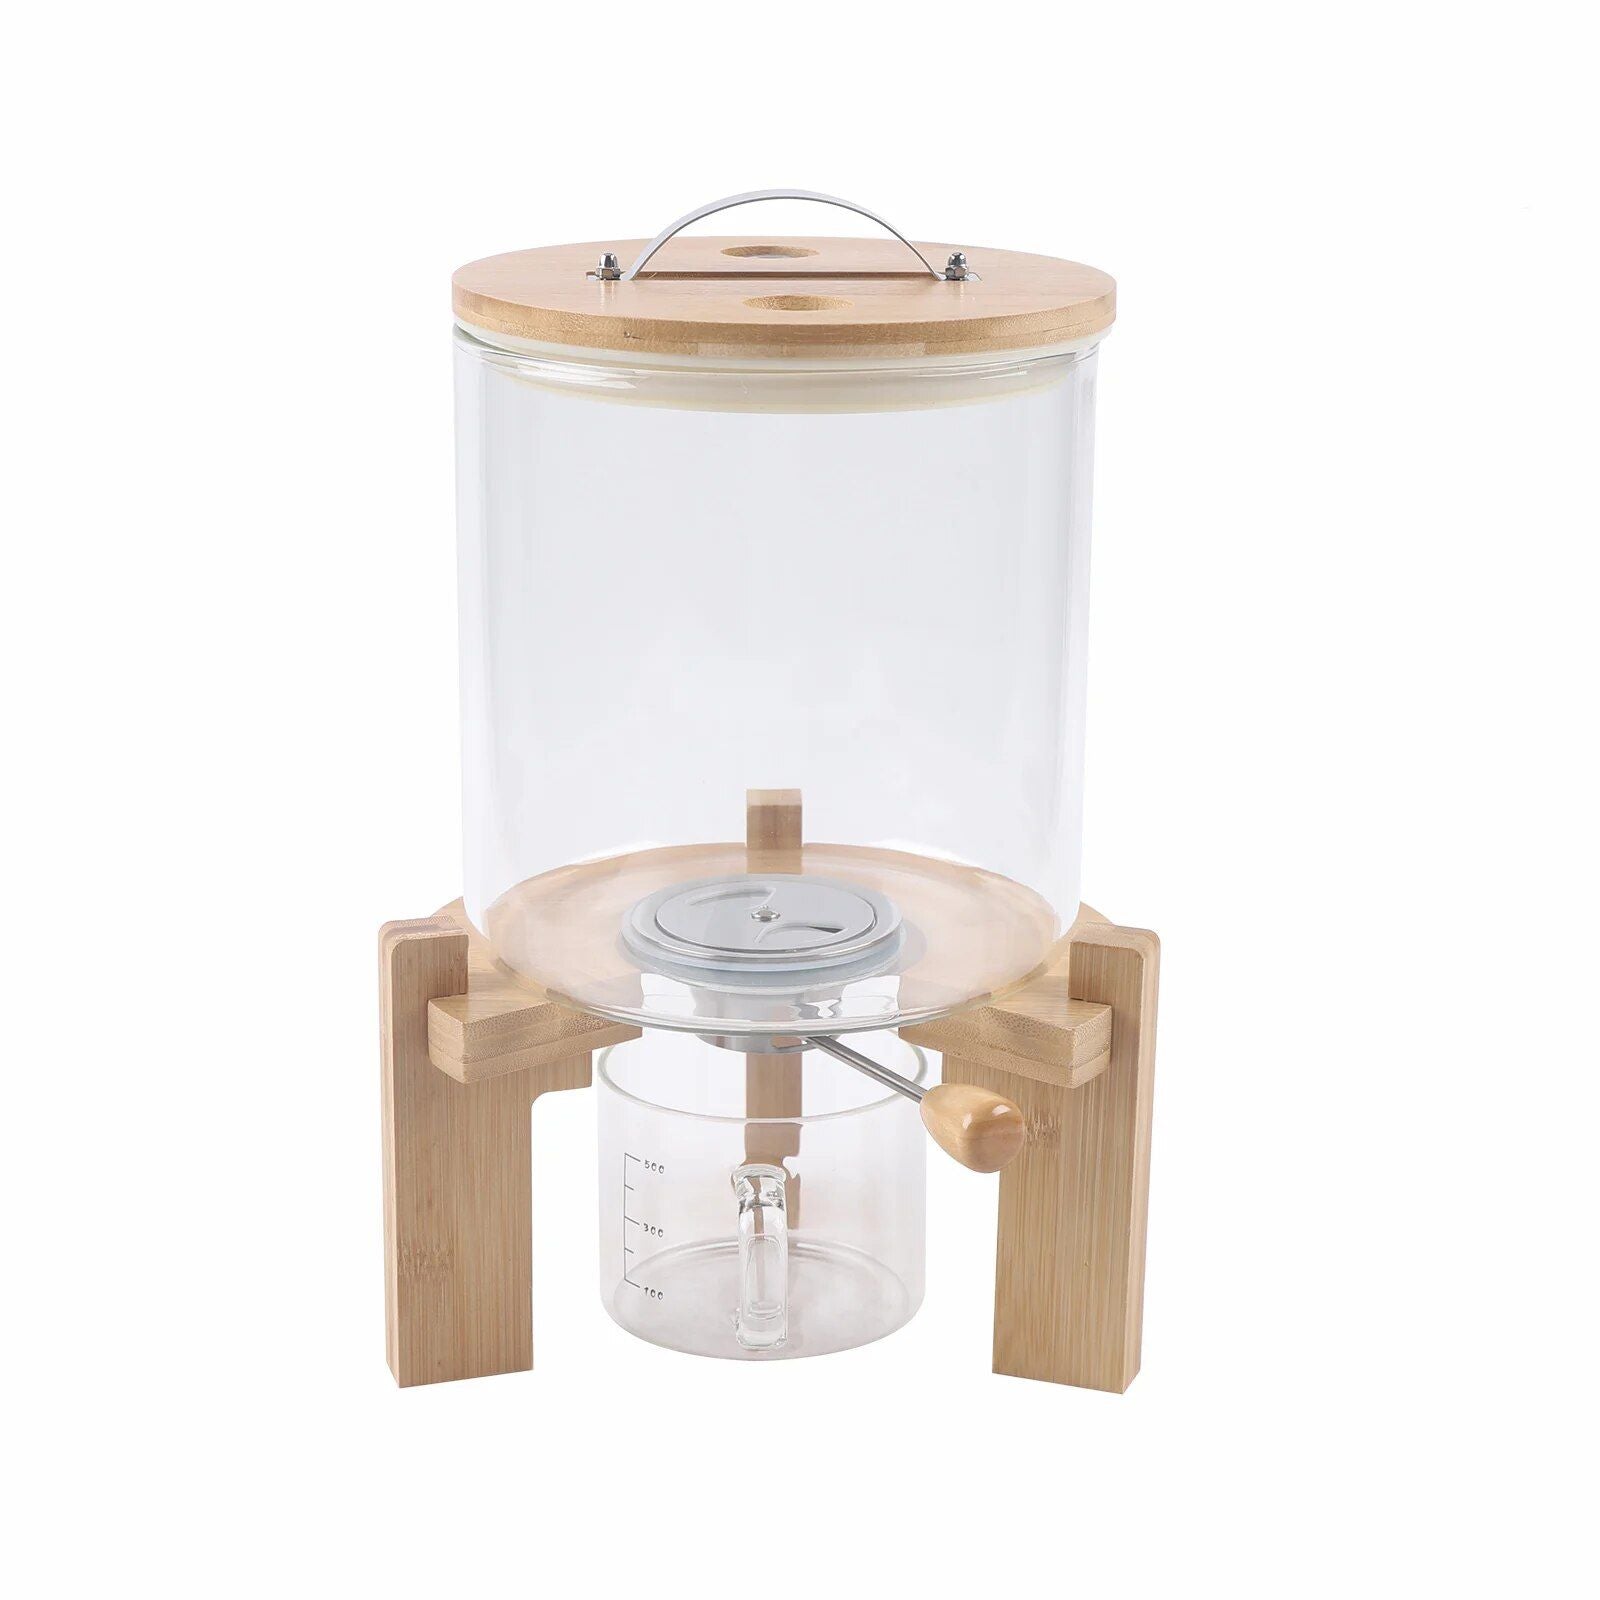 Modern Glass and Bamboo Food Storage Dispenser for Kitchen Organization - 5L/7.5L Capacity